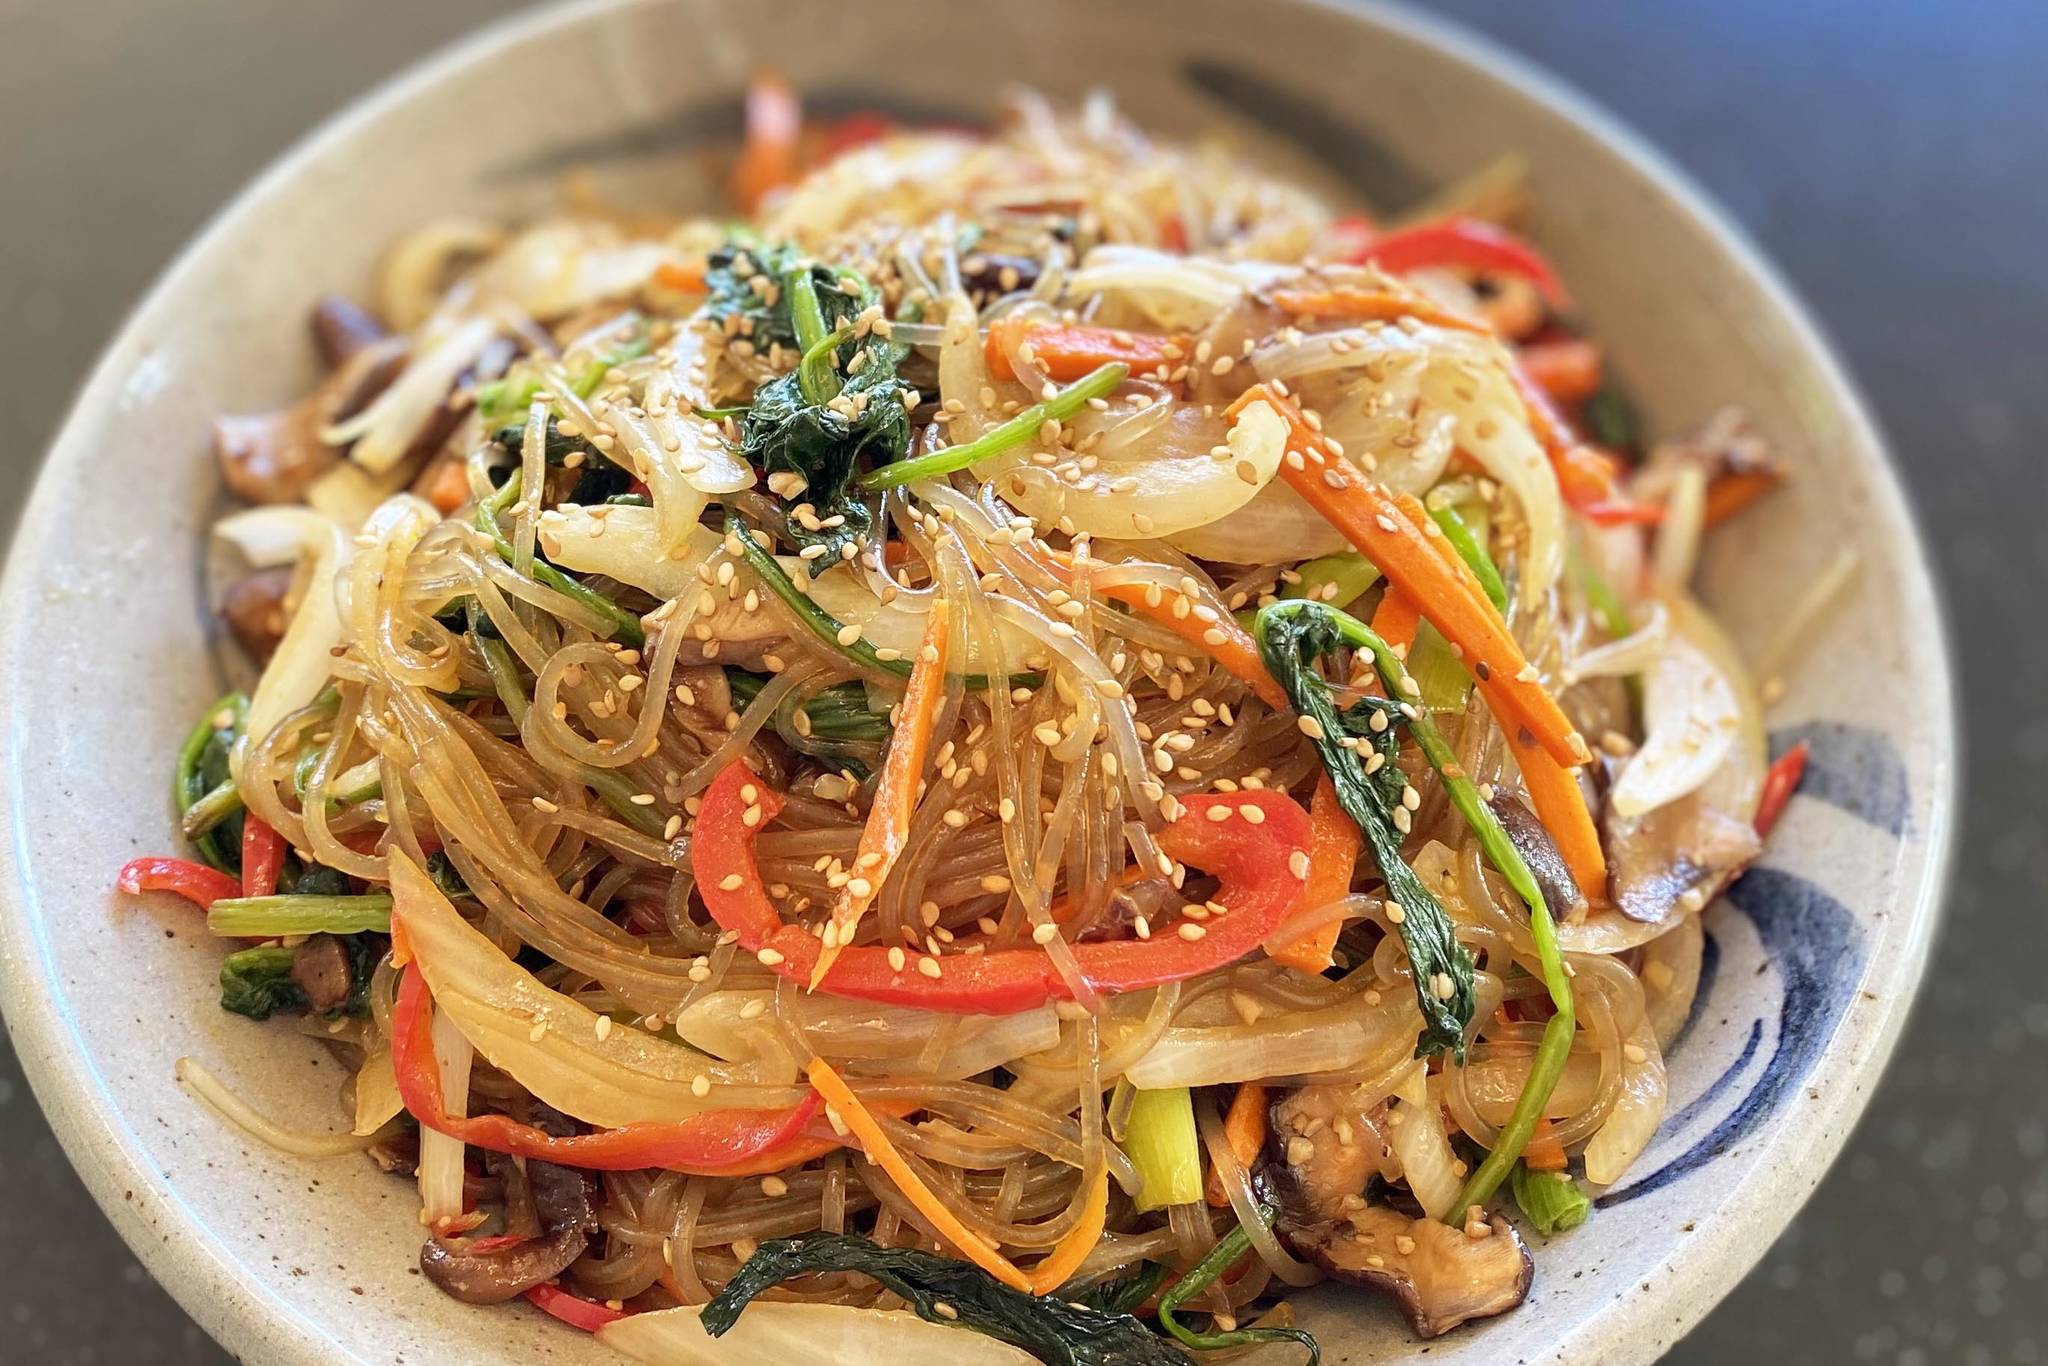 Containing onions, carrots, shitake mushrooms and noodles Japchae is a stir-fried Korean vegetable and noodle dish that is delectable hot, cold and everywhere in between. (Photo by Tressa Dale/Peninsula Clarion)